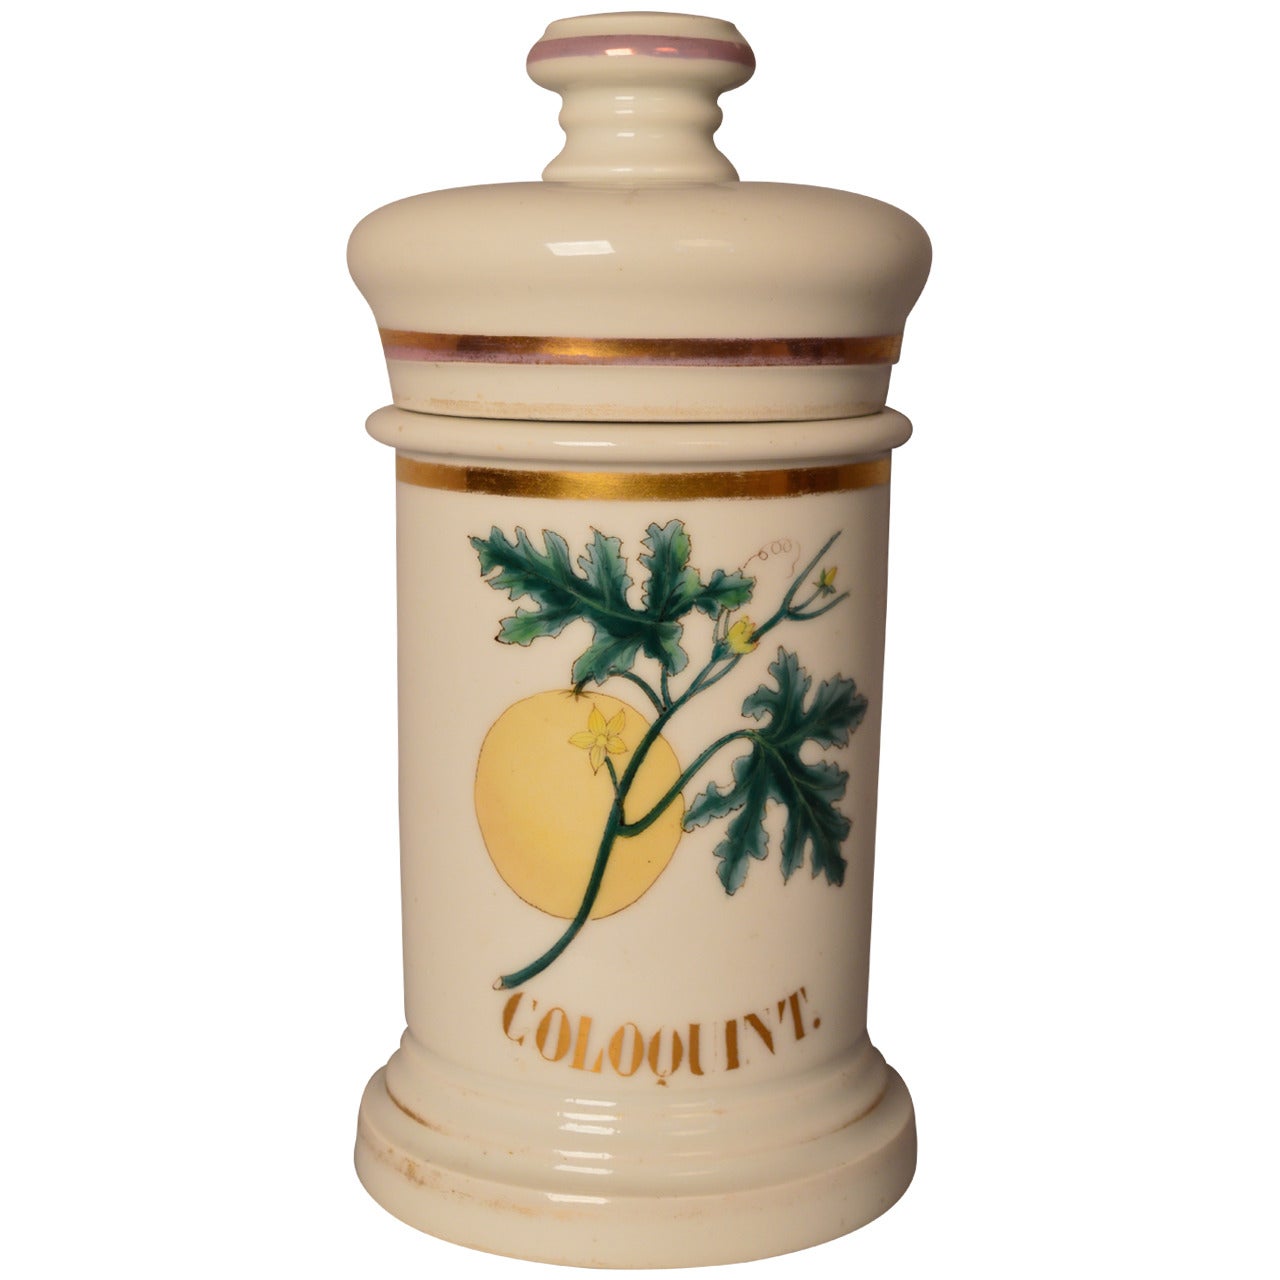 19th Century, French, Porcelain Apothecary Jar with Finley Painted Fruit Label